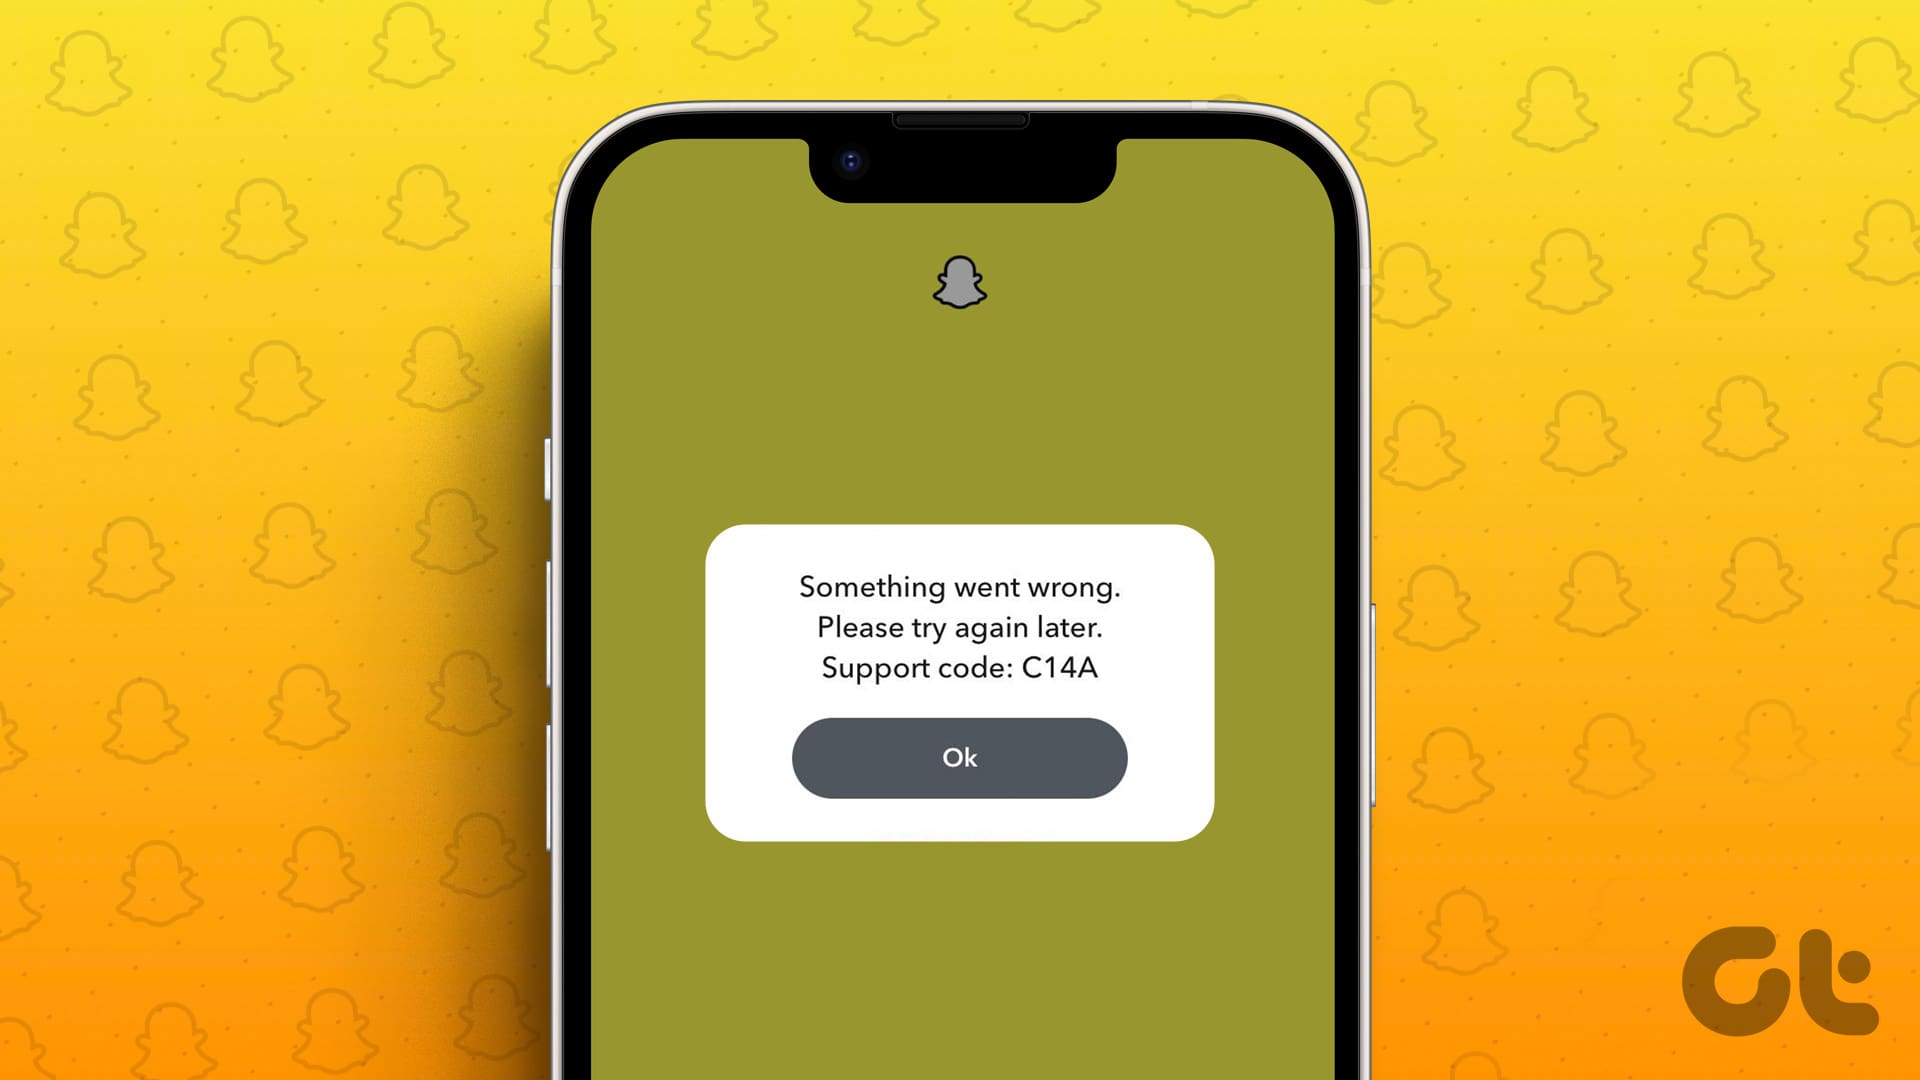 Snapchat support code C14A